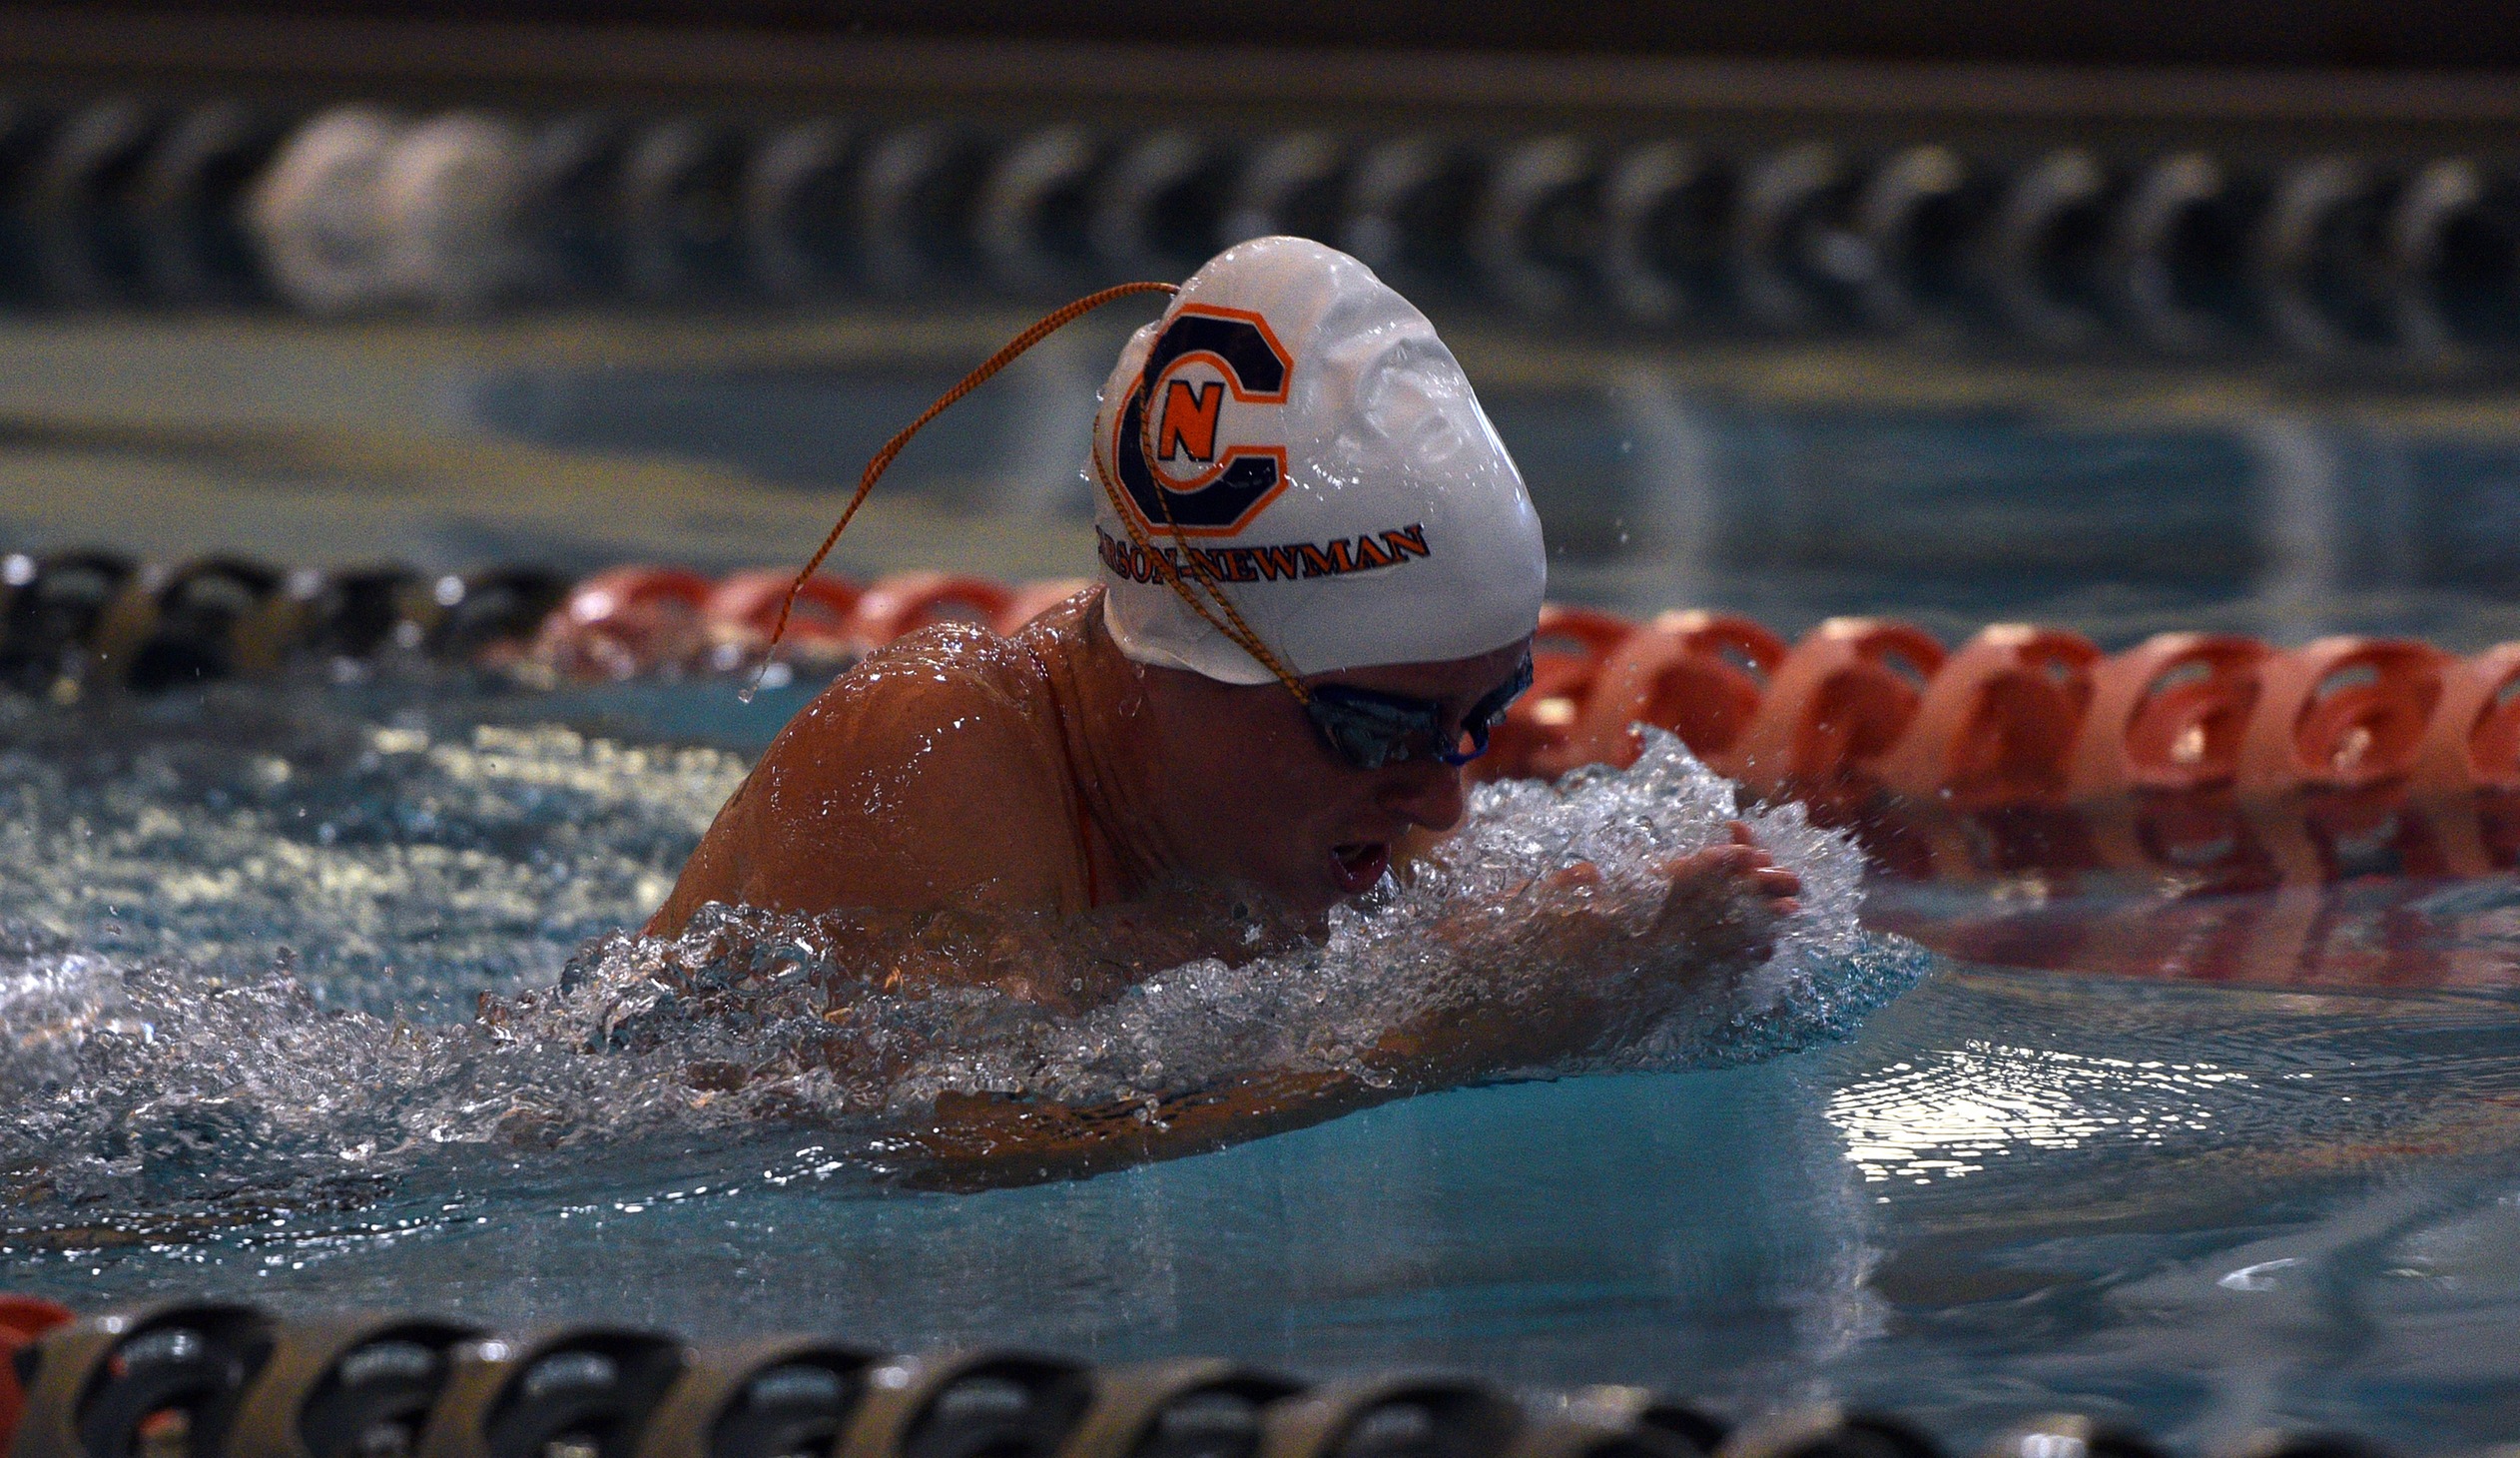 C-N Swim wins at home against Emory & Henry